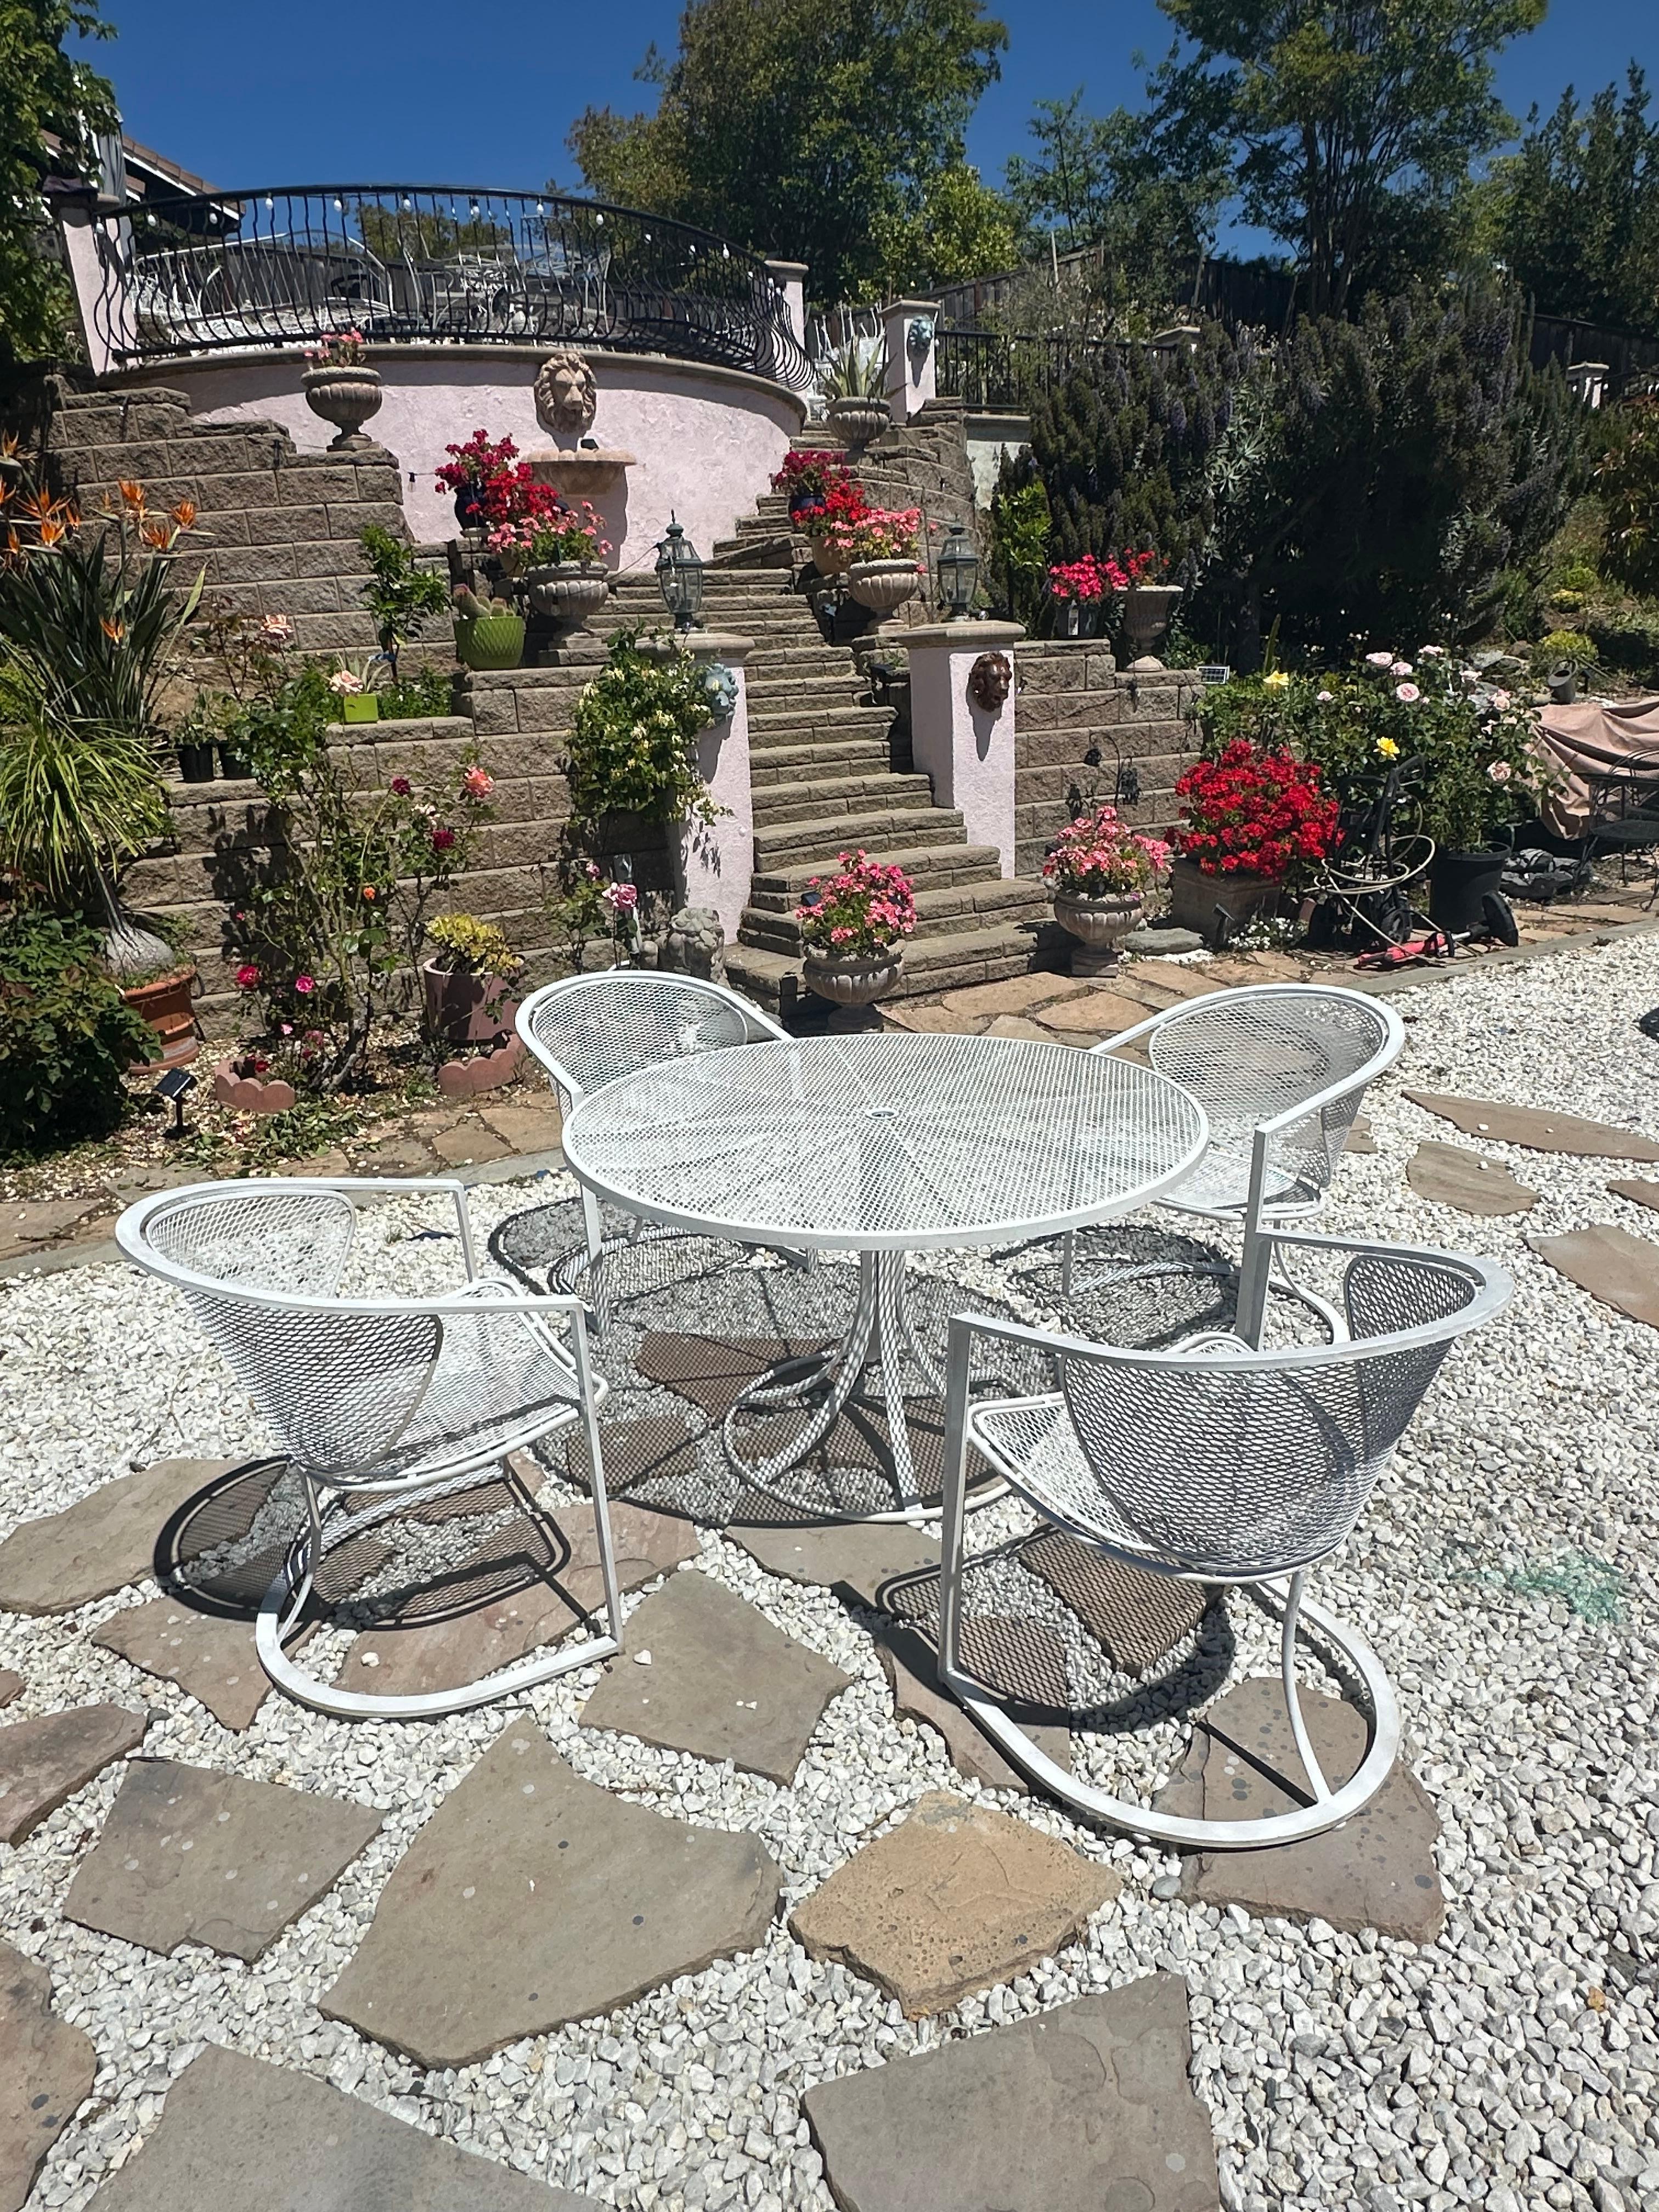 A very rare patio set by Russell
Woodard
Designed by Maurizio Tempestini
Iconic Tempestini for Salterini radar armchairs and 48